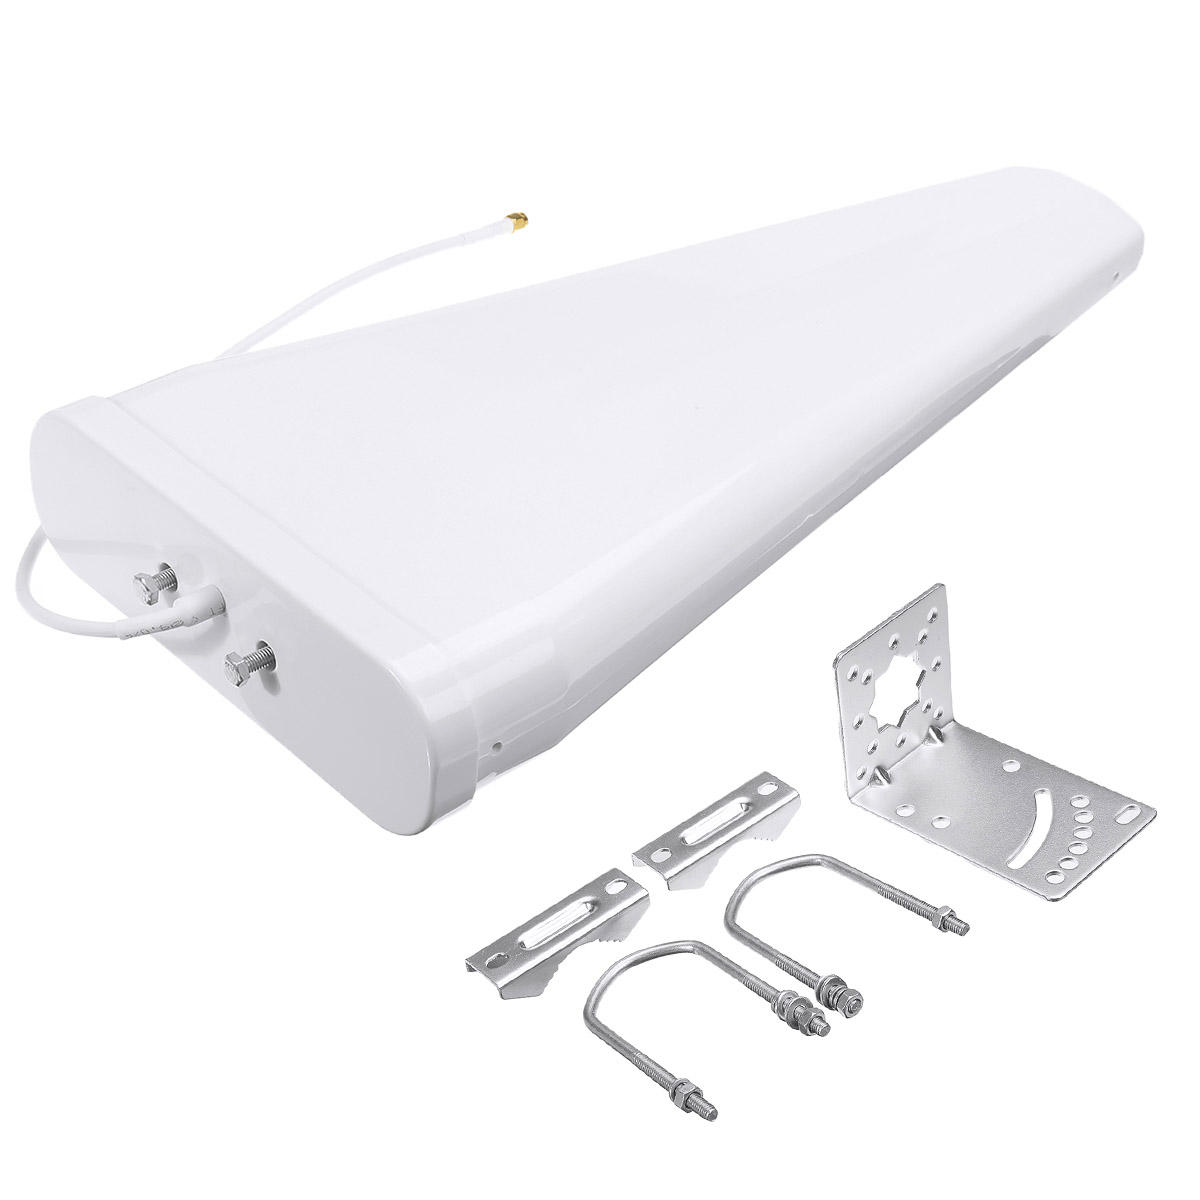 698-2700MHZ 3G 4G Omnidirectionele Outdoor Cellulaire Yagi-antenne SMA Male voor 4G